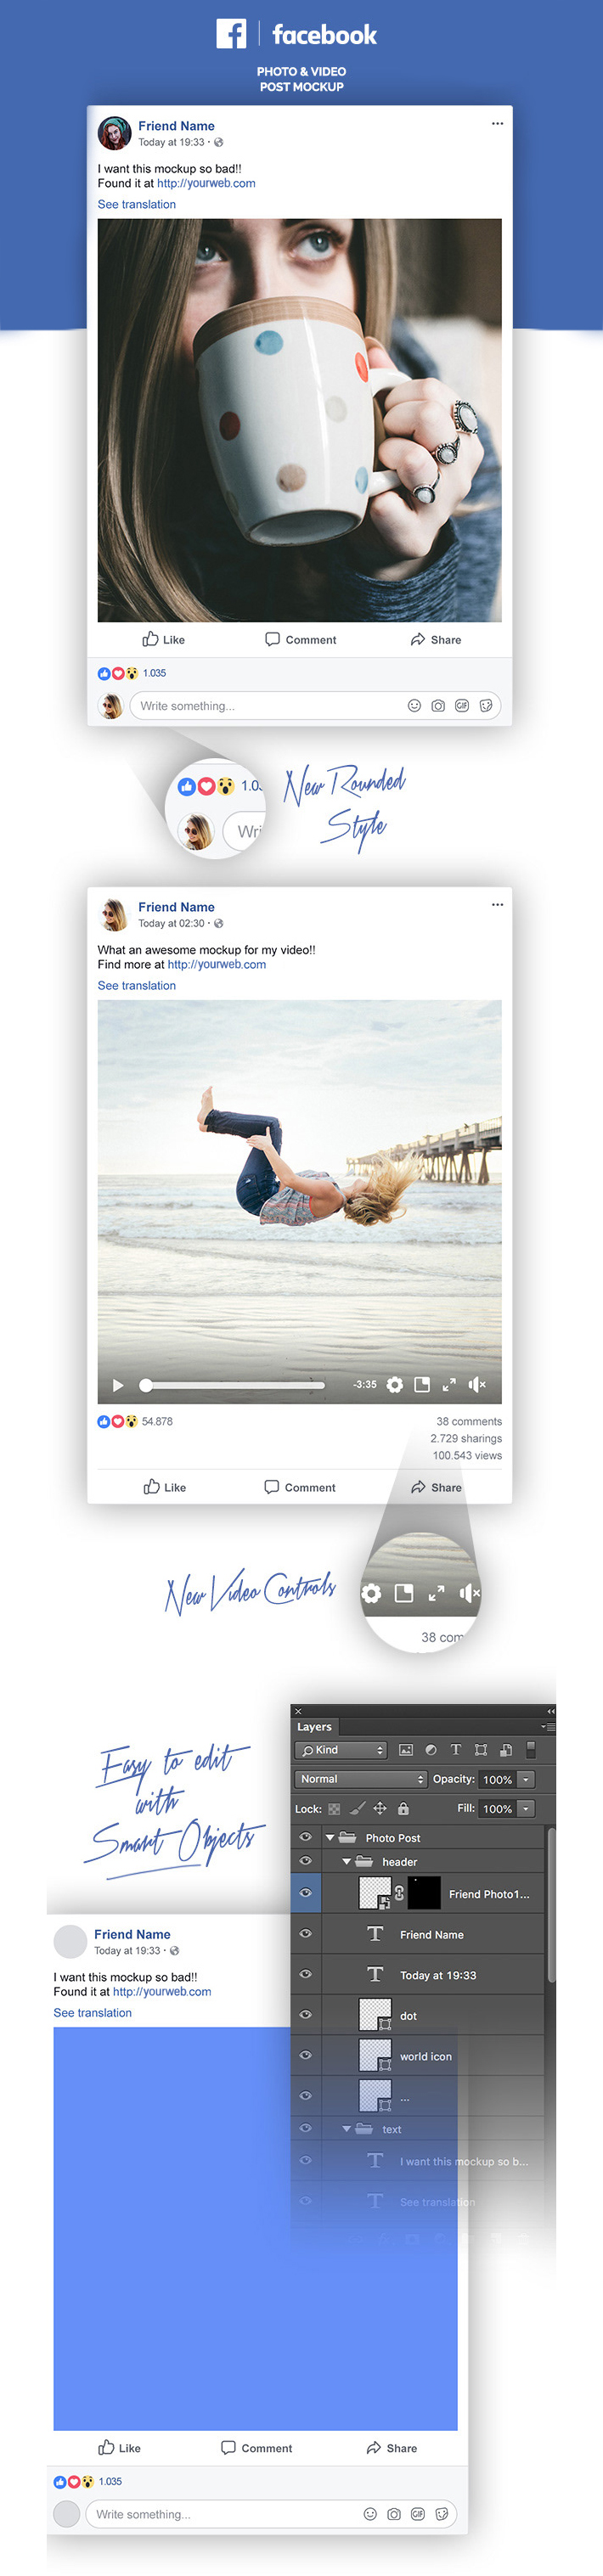 Facebook Post Template Free Download (PSD)